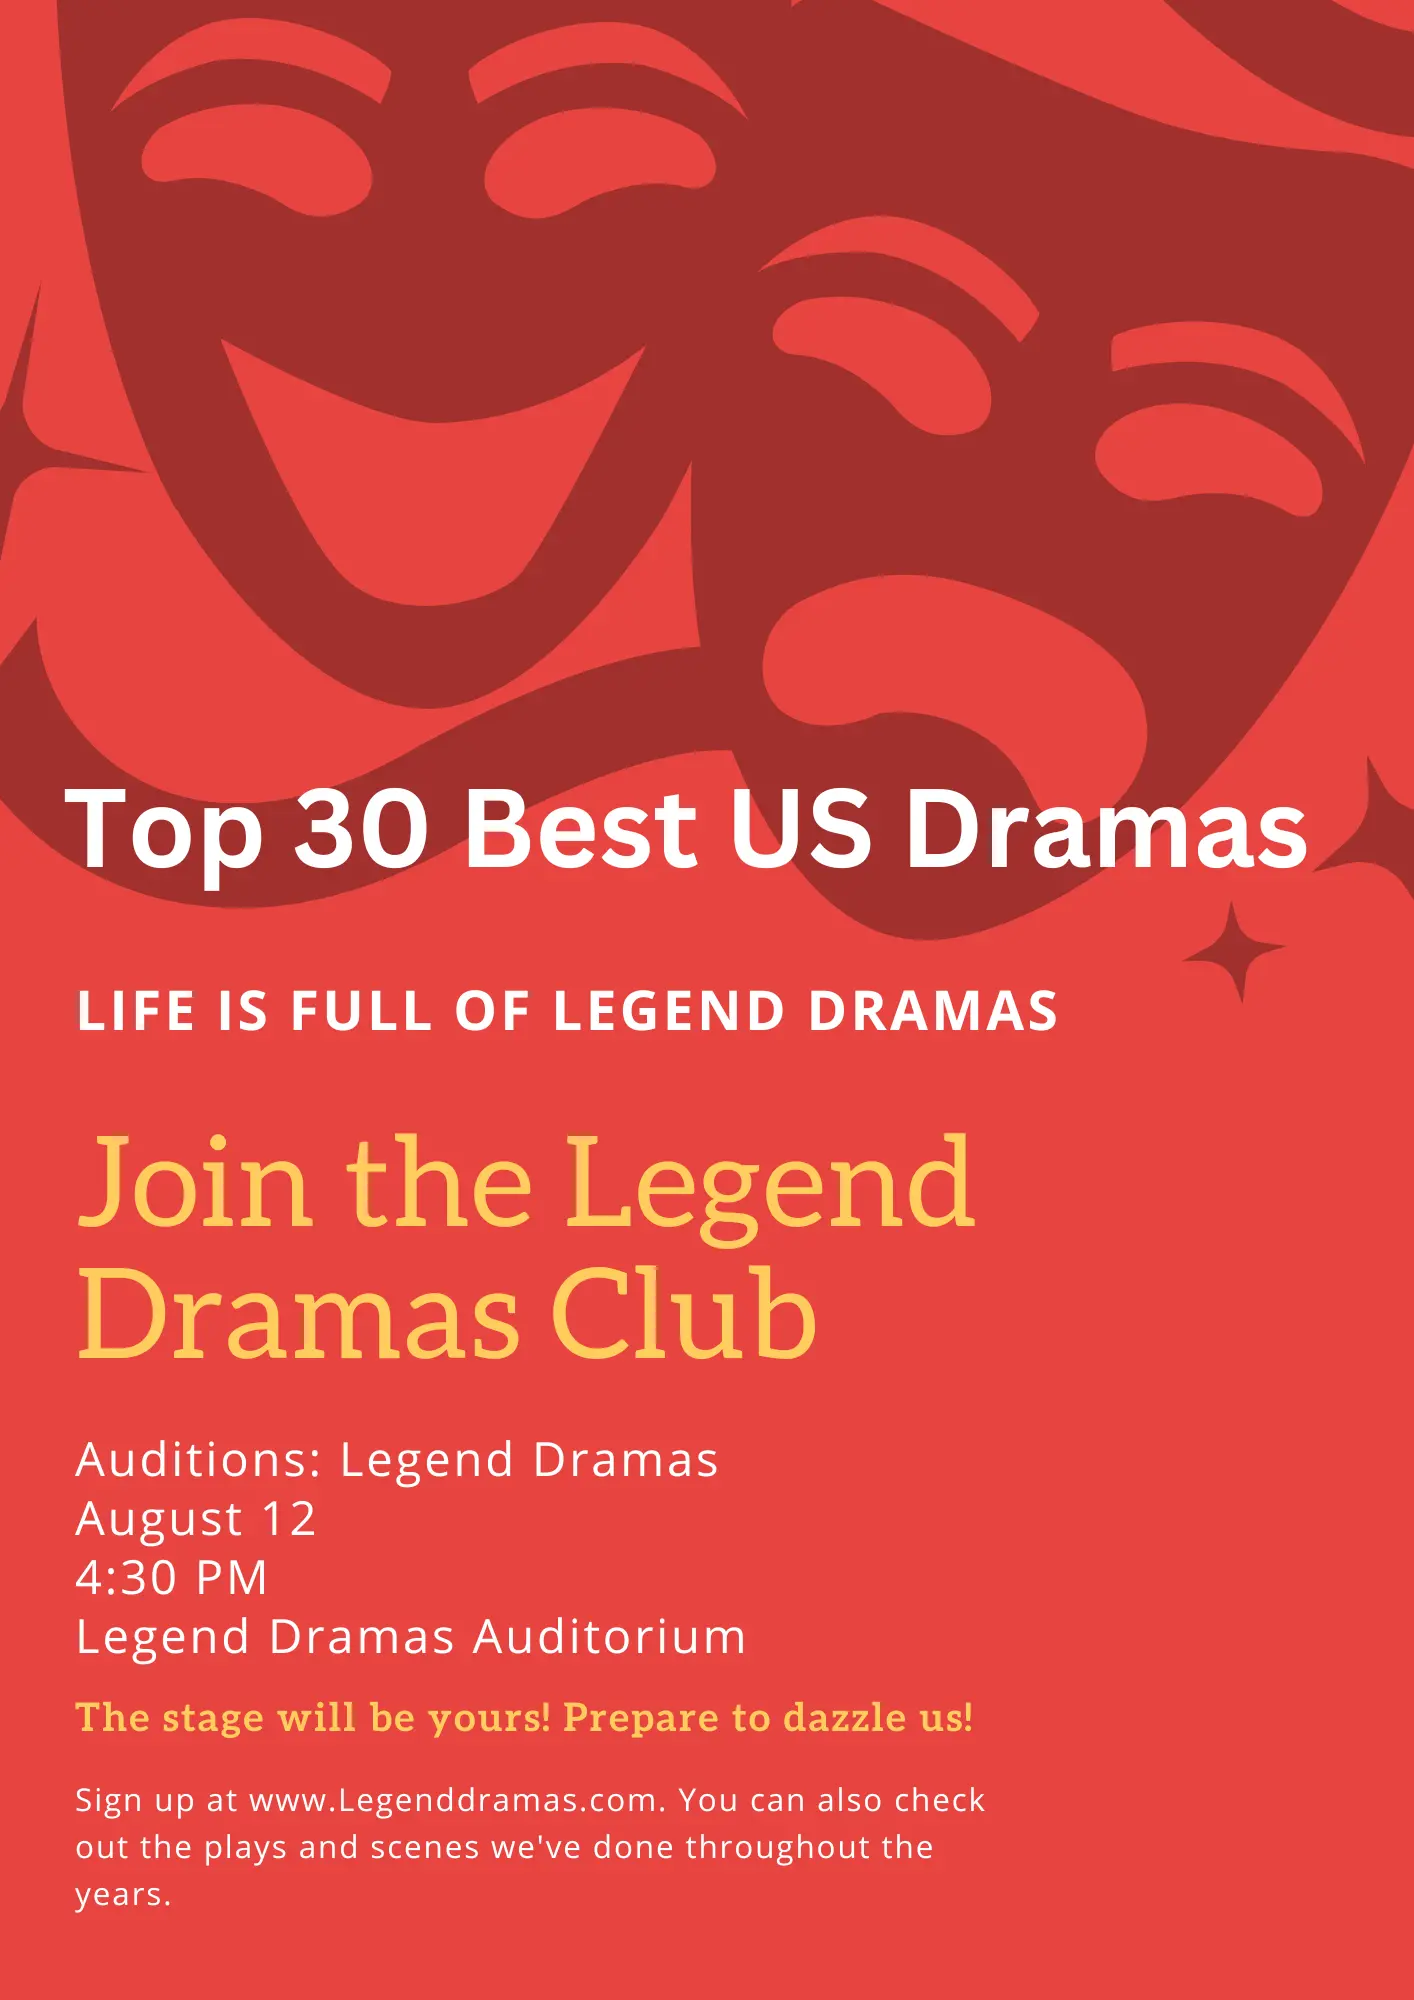 The Top 30 Best US Dramas